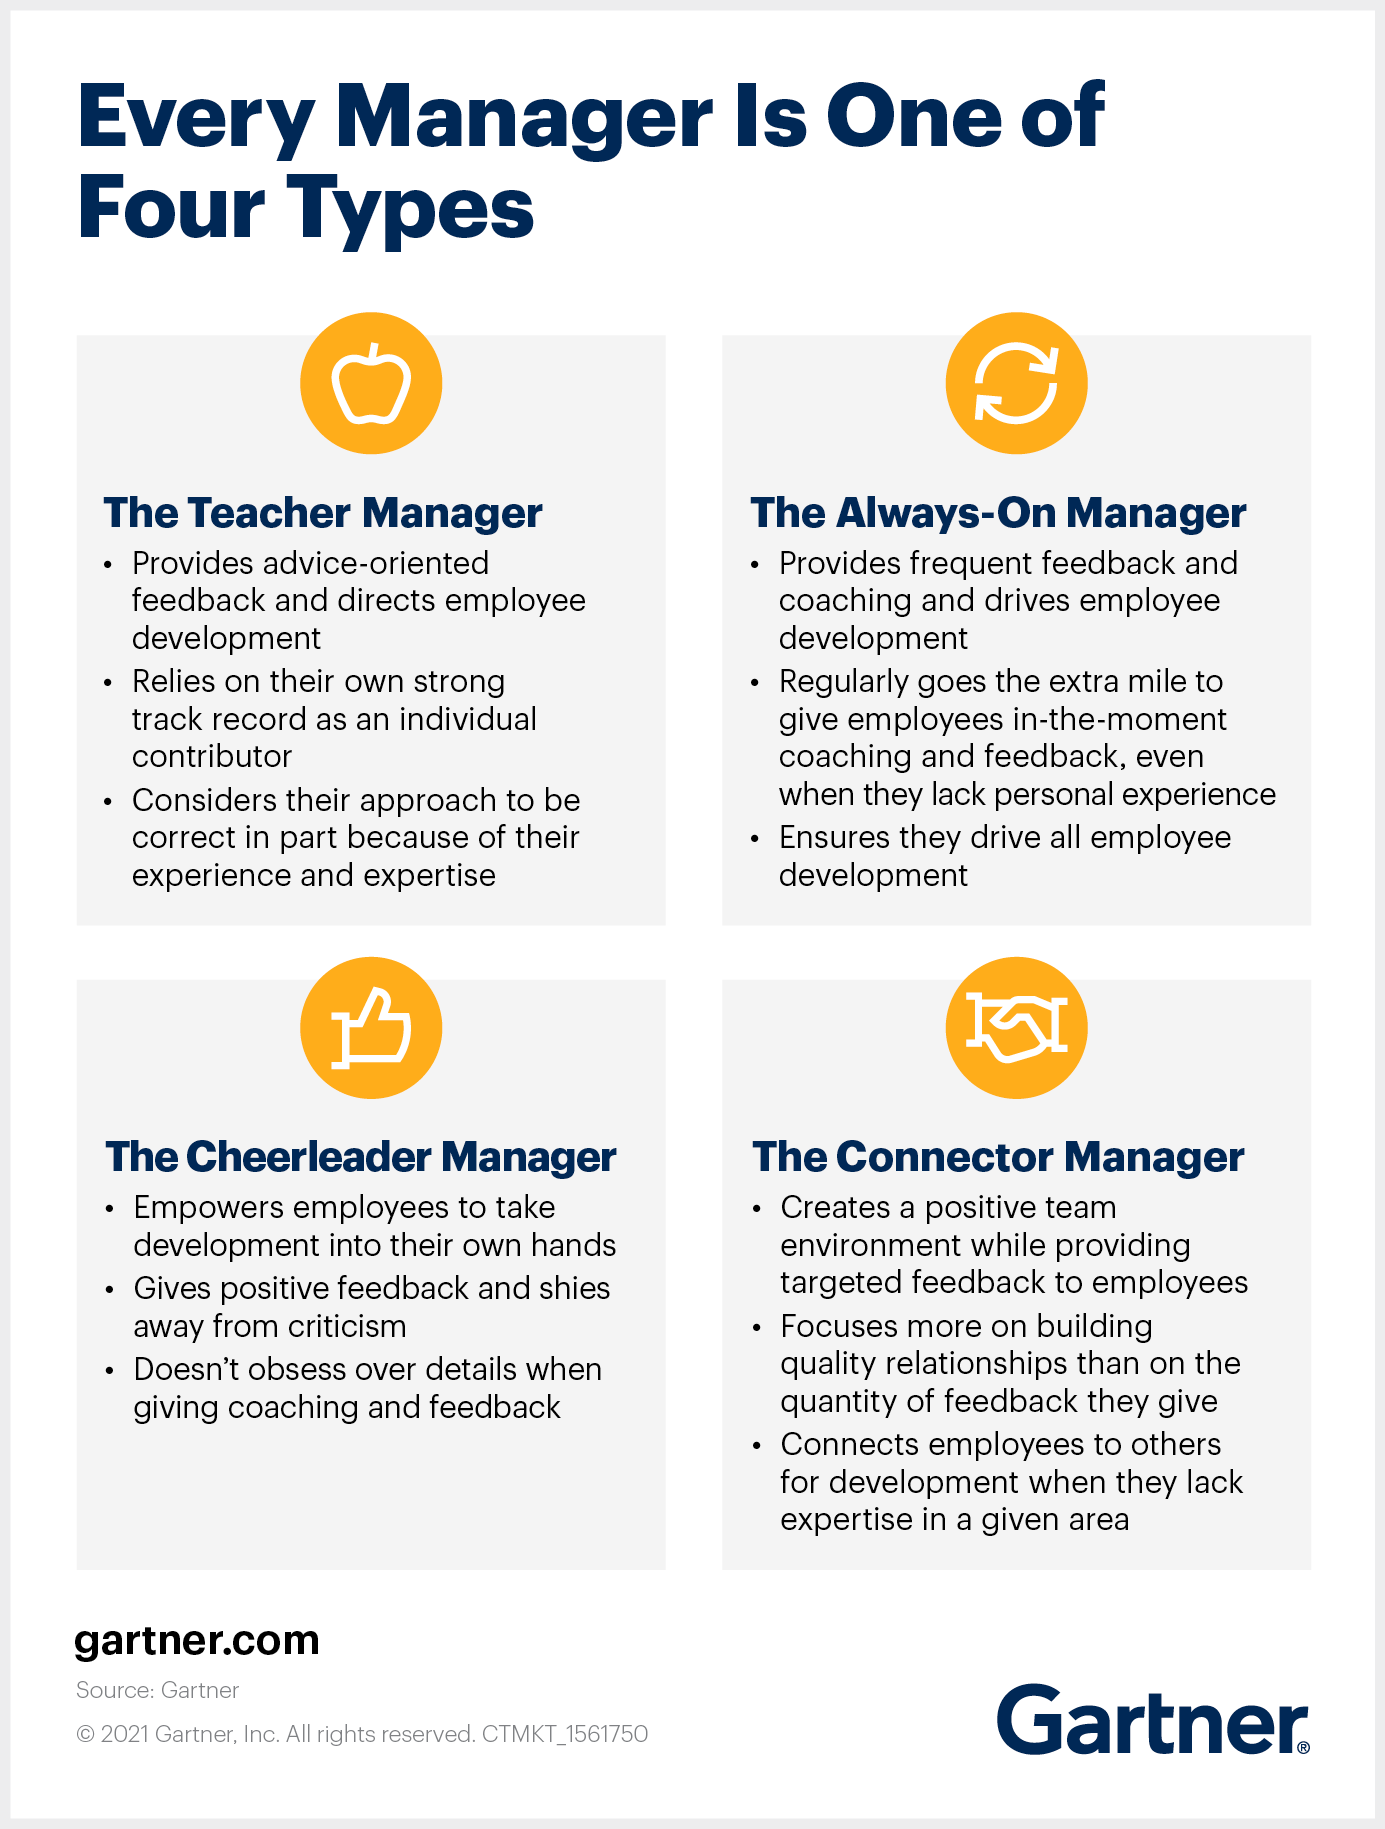 Four Types of Managers